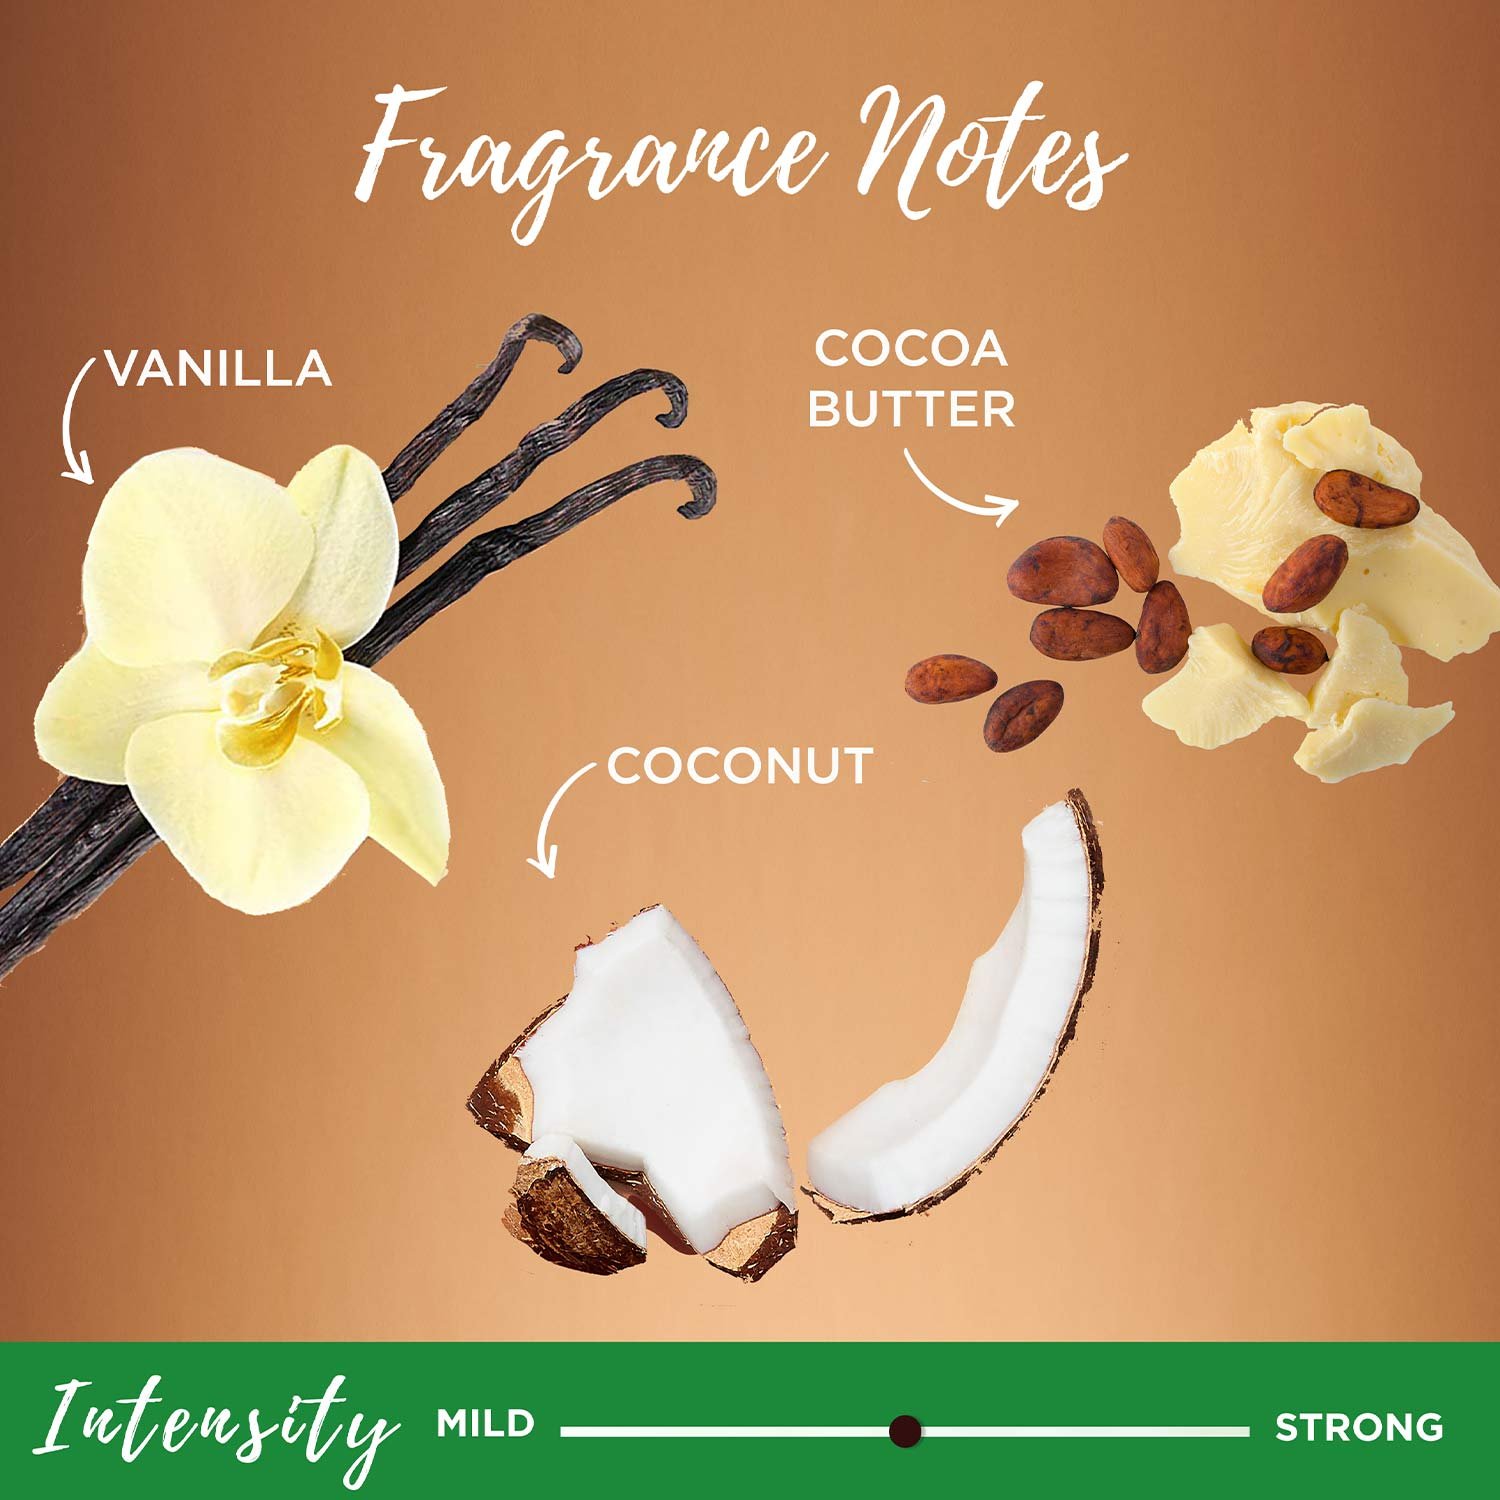 Coco Cocoa smoothing oil fragrance notes